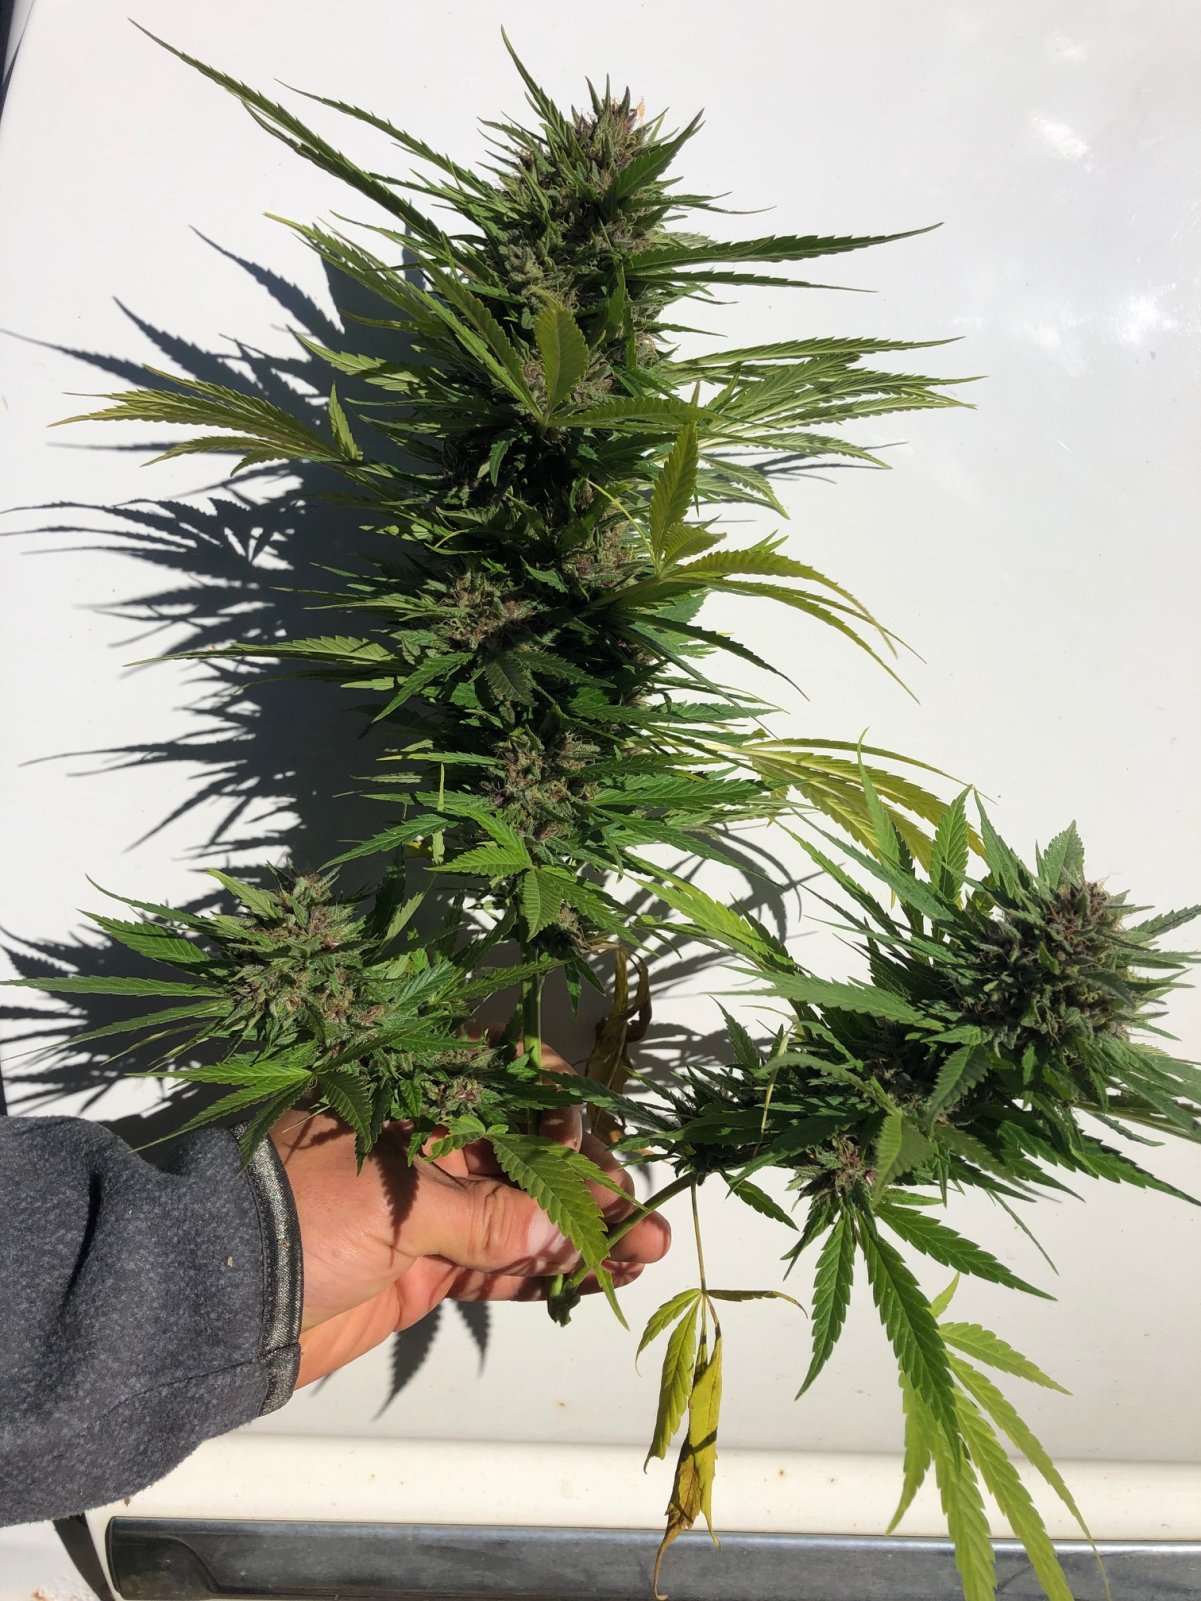 Durban Poison top section harvest water deprivation 7th day pheno in the ground.jpg.jpg